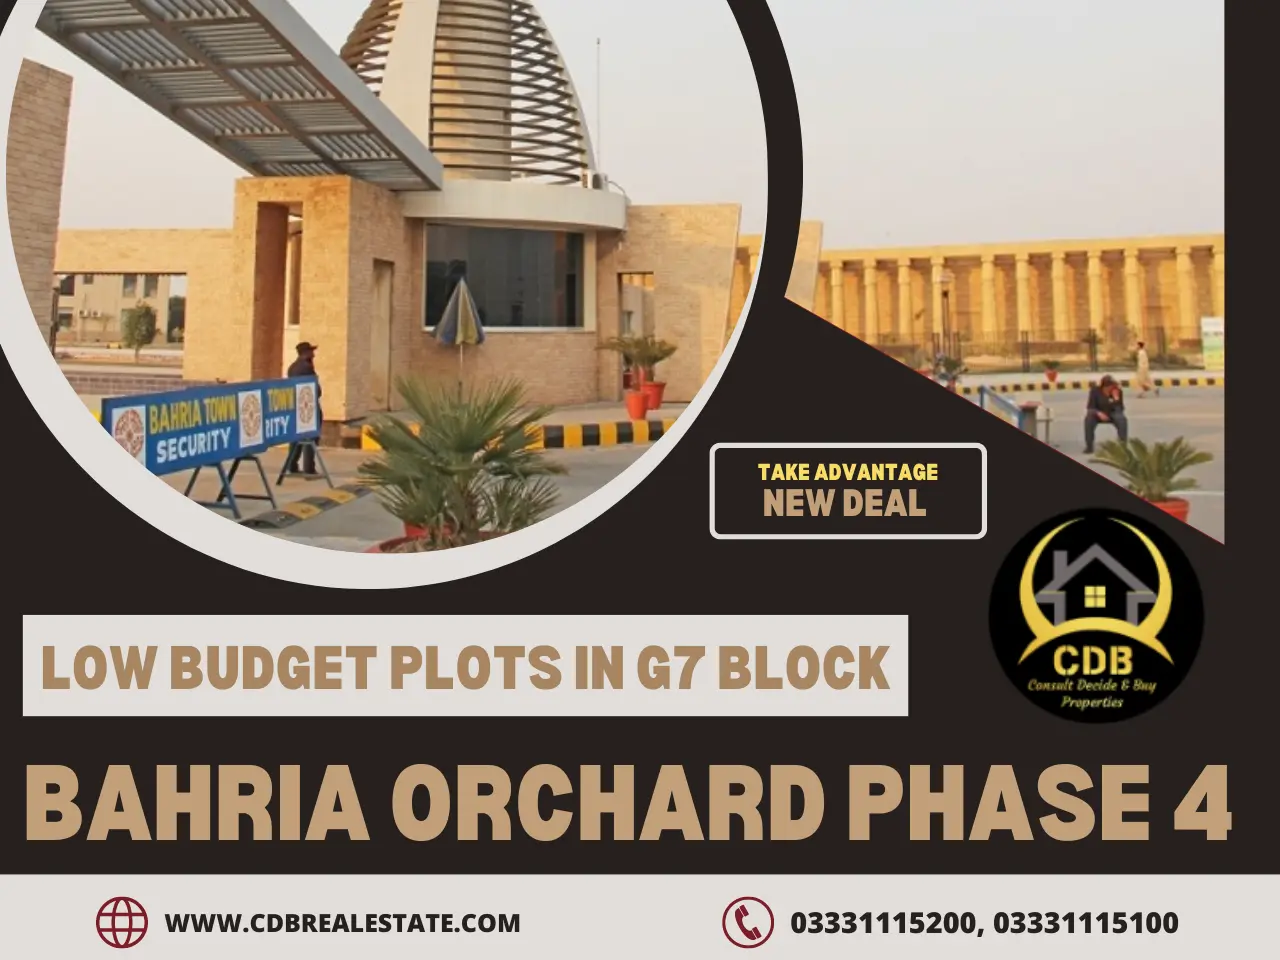 Low Budget Plots In Bahria Orchard Phase 4 G7 Block - New Deal